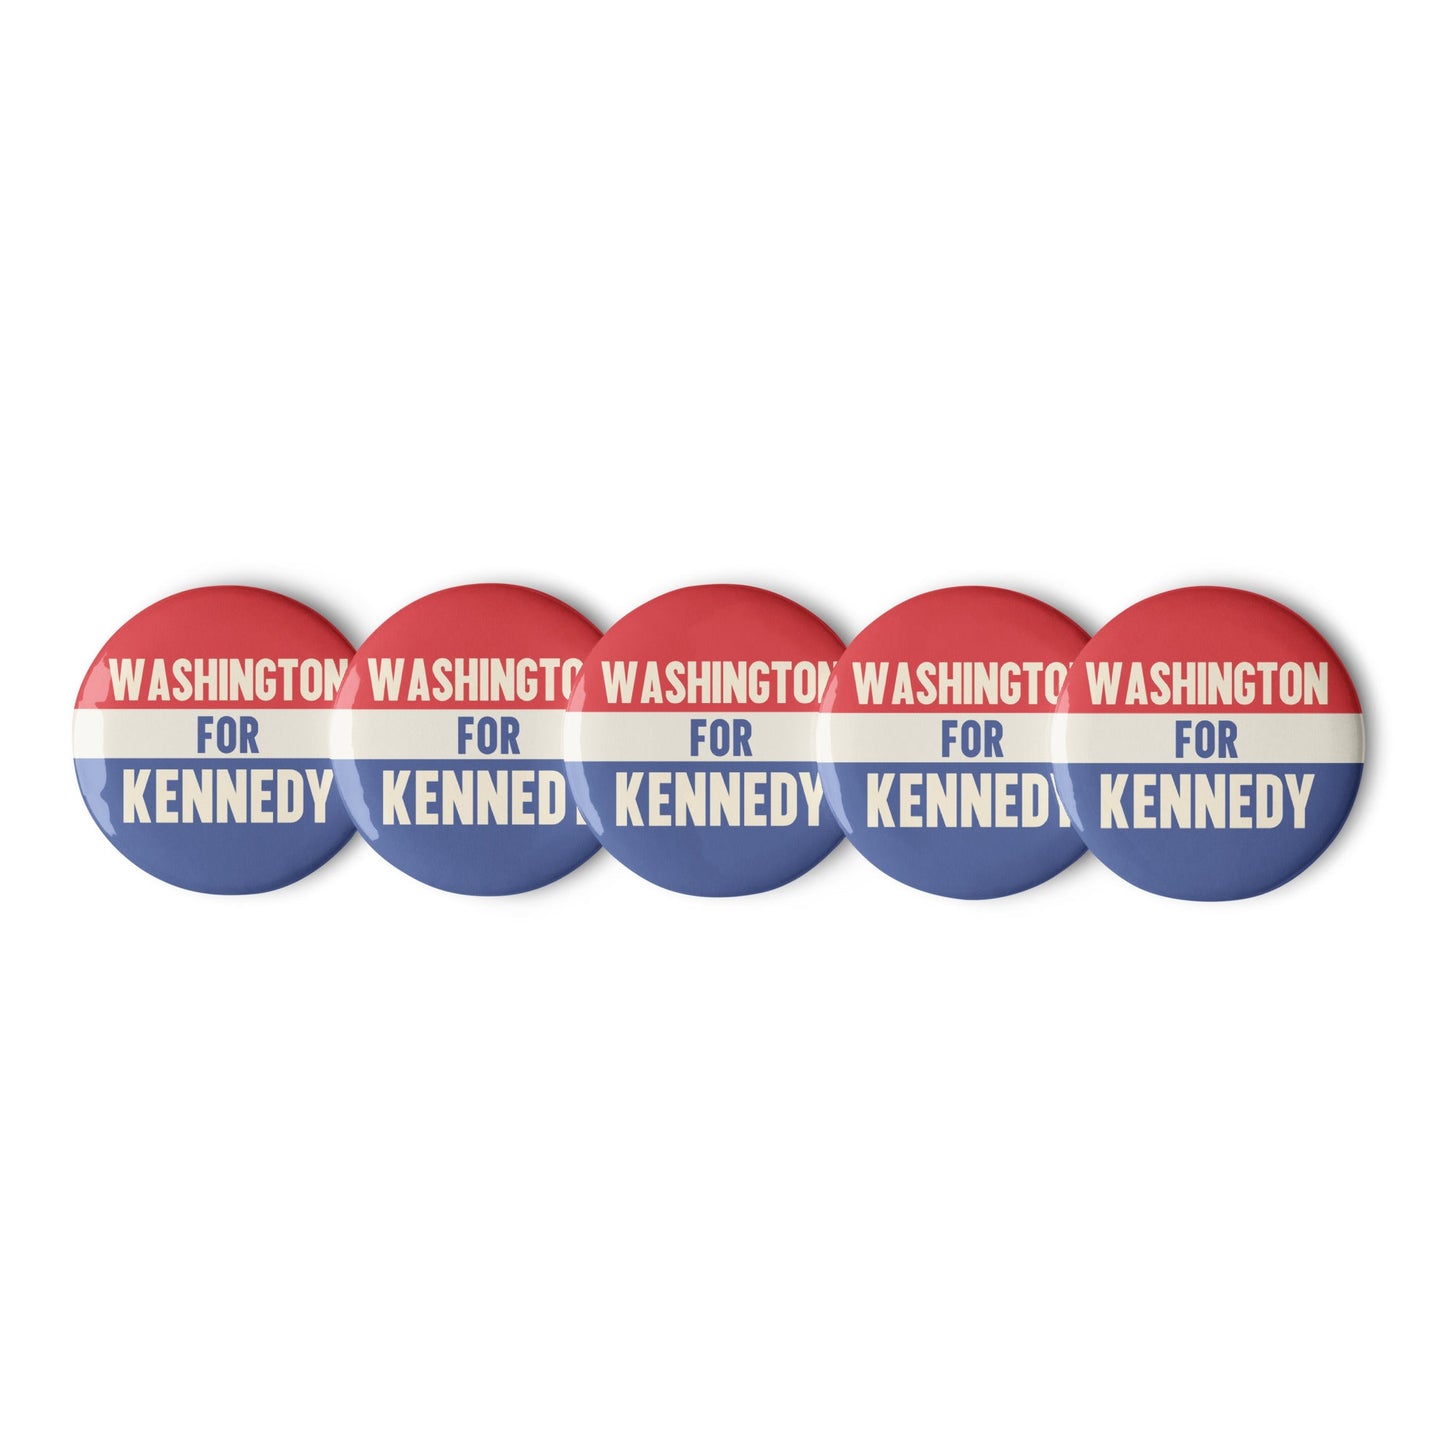 Washington for Kennedy (5 Buttons) - TEAM KENNEDY. All rights reserved